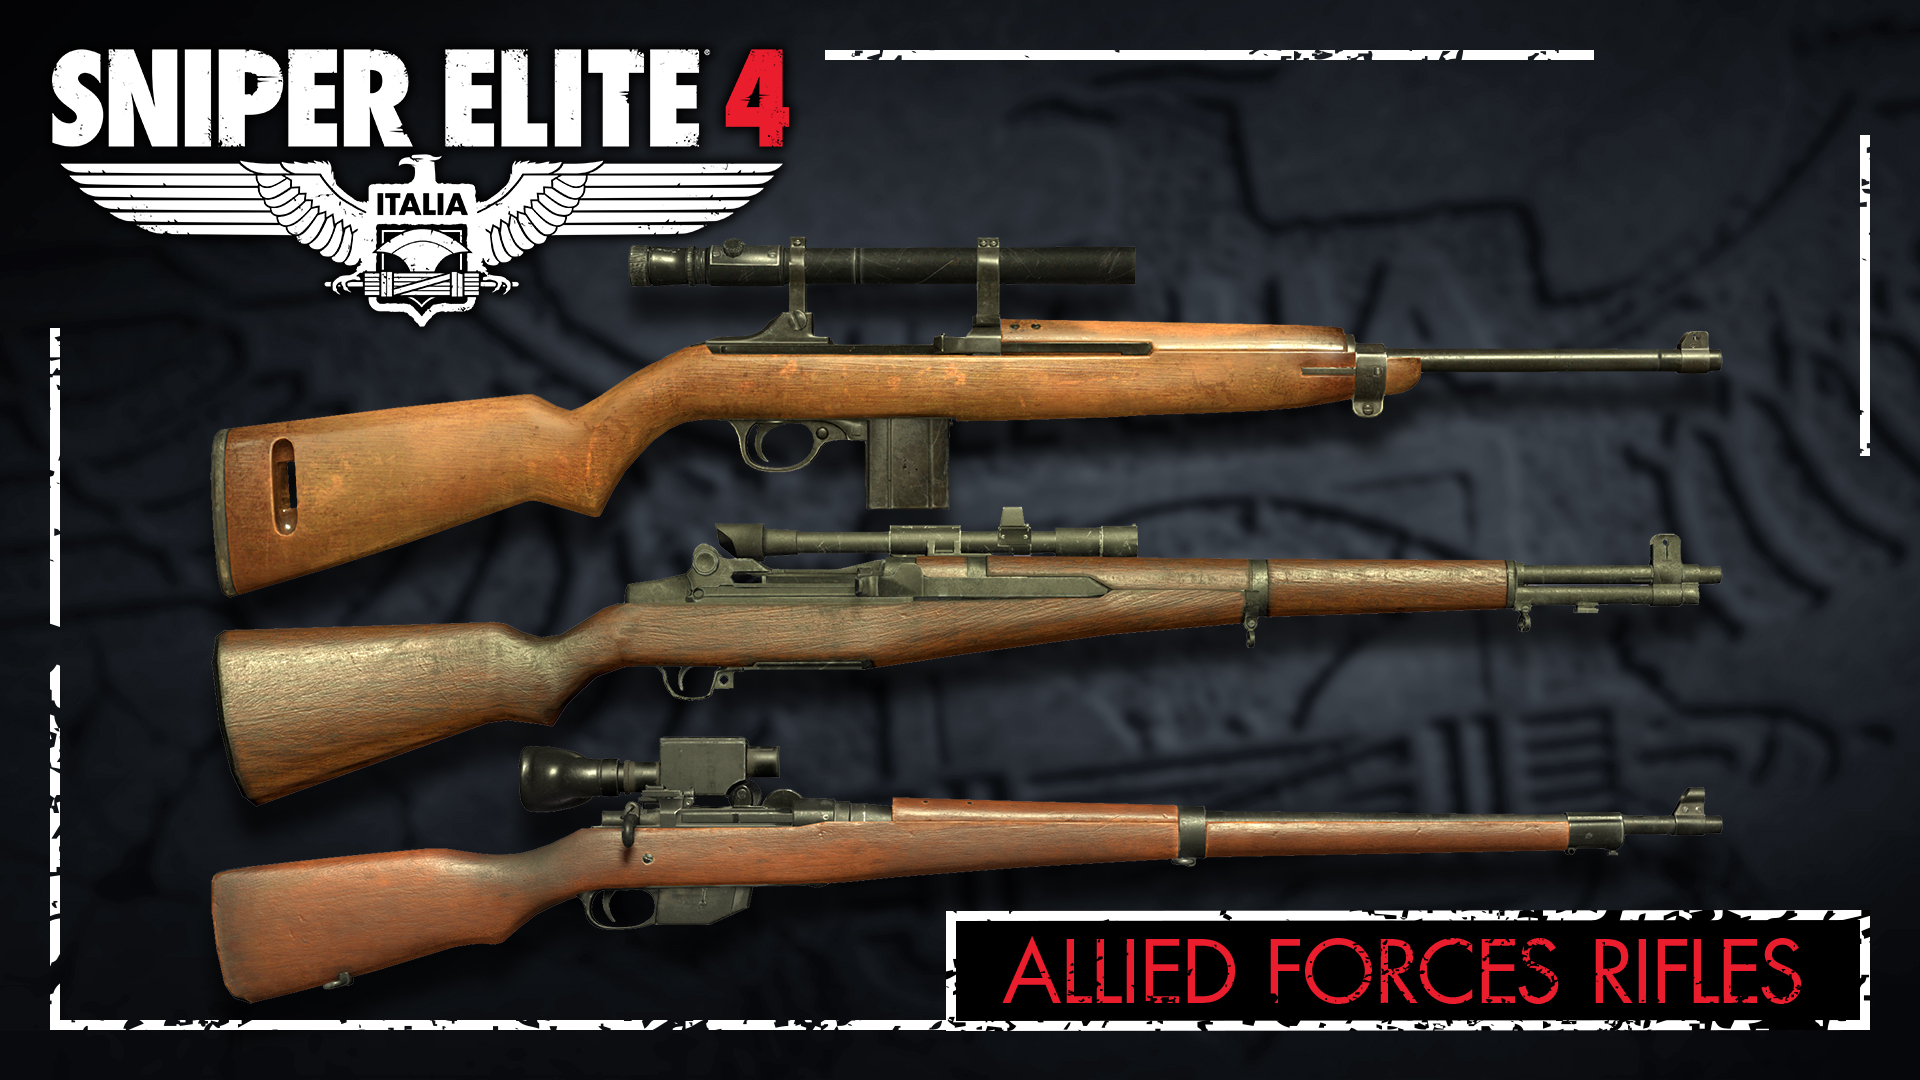 Sniper Elite 4 - Allied Forces Rifle Pack DLC Steam CD Key, 4.51 usd